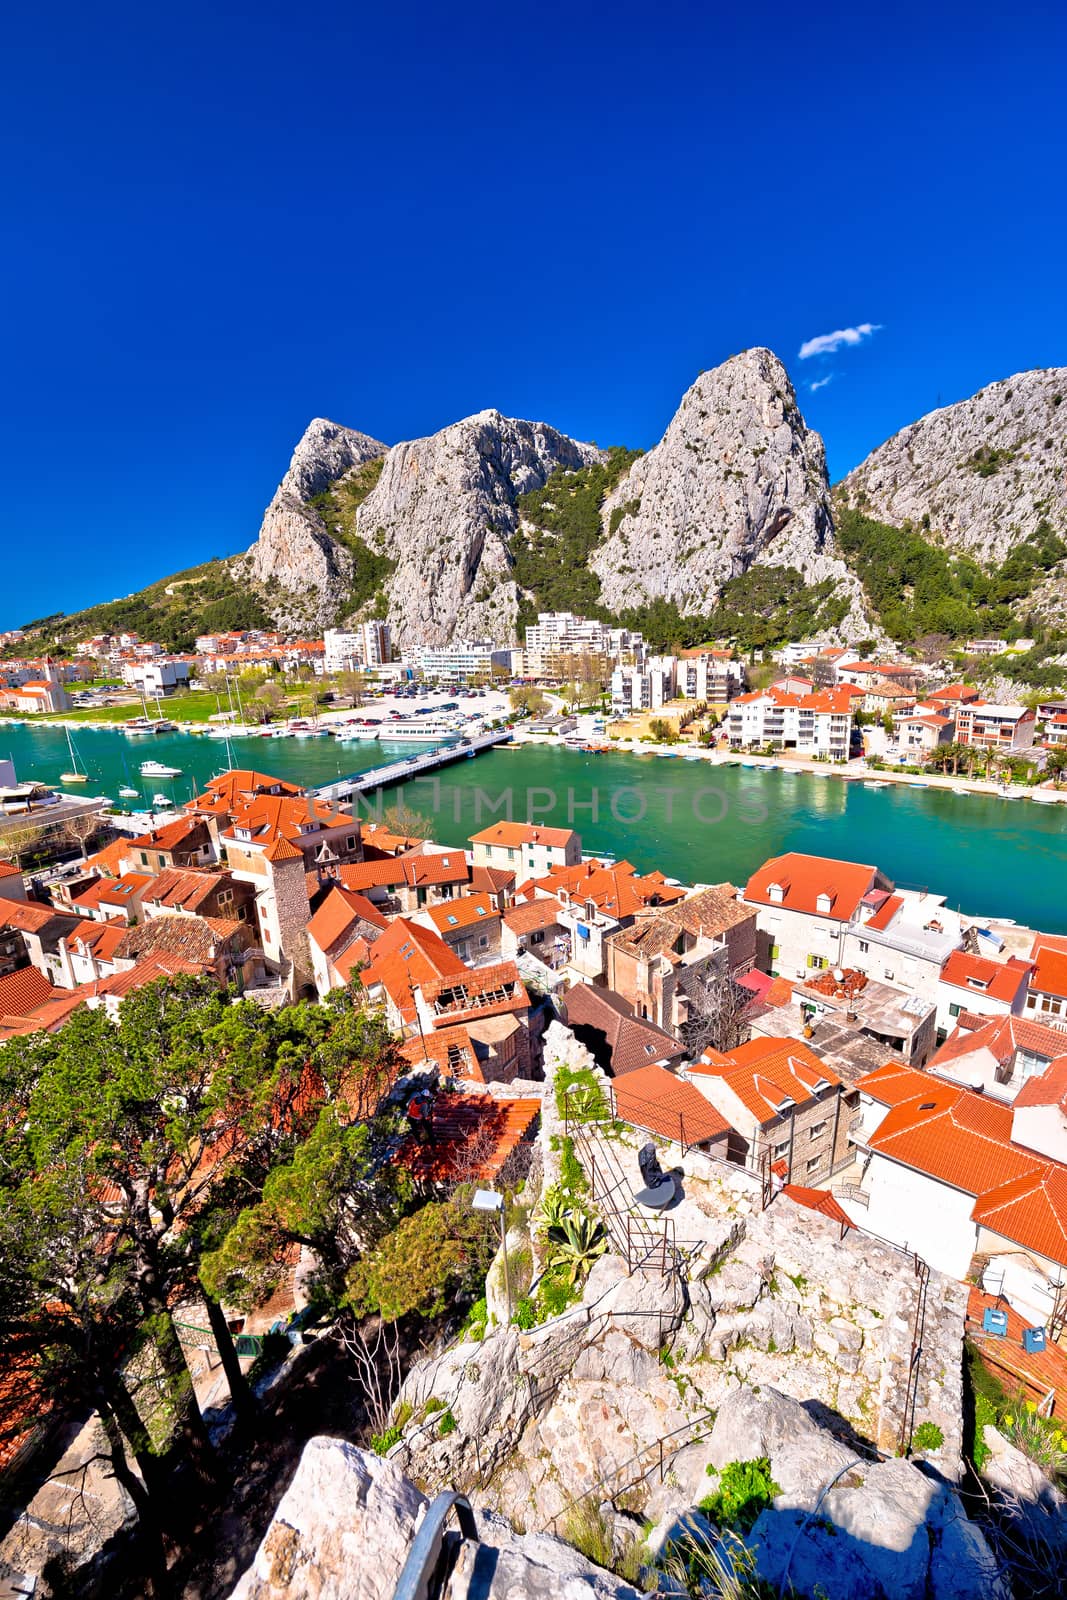 Town of Omis and Cetina river mouth panoramic view by xbrchx